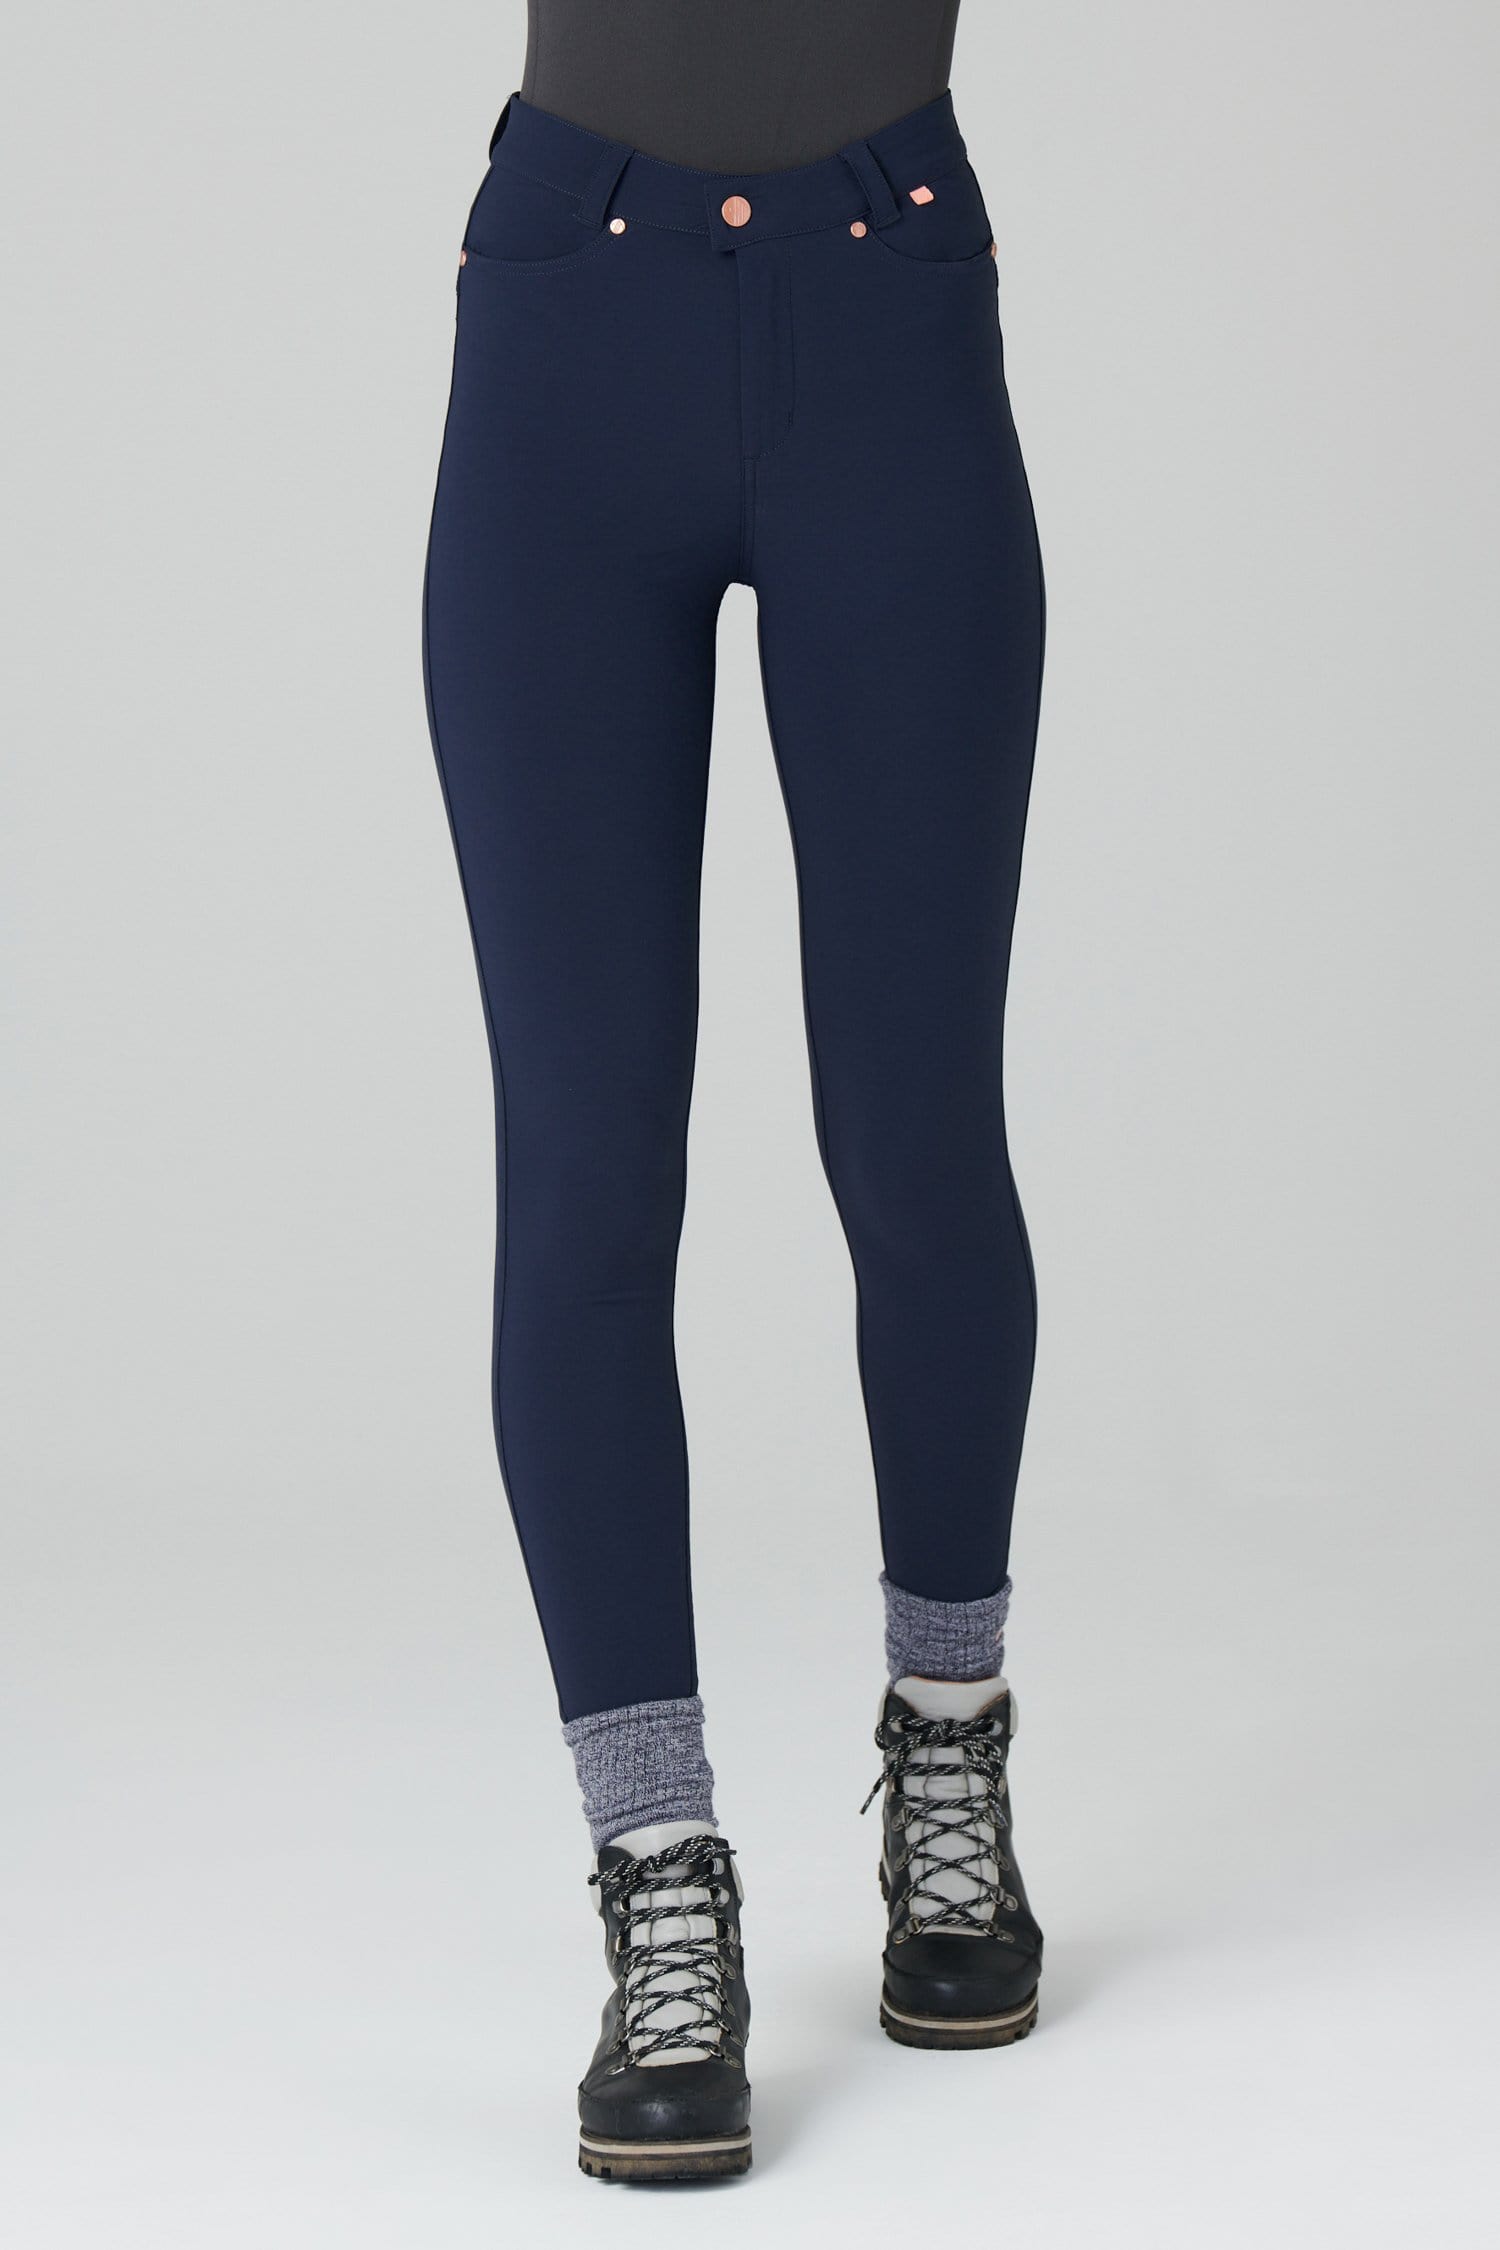 Max Stretch Skinny Outdoor Trousers - Deep Navy - 26r / Uk8 - Womens - Acai Outdoorwear